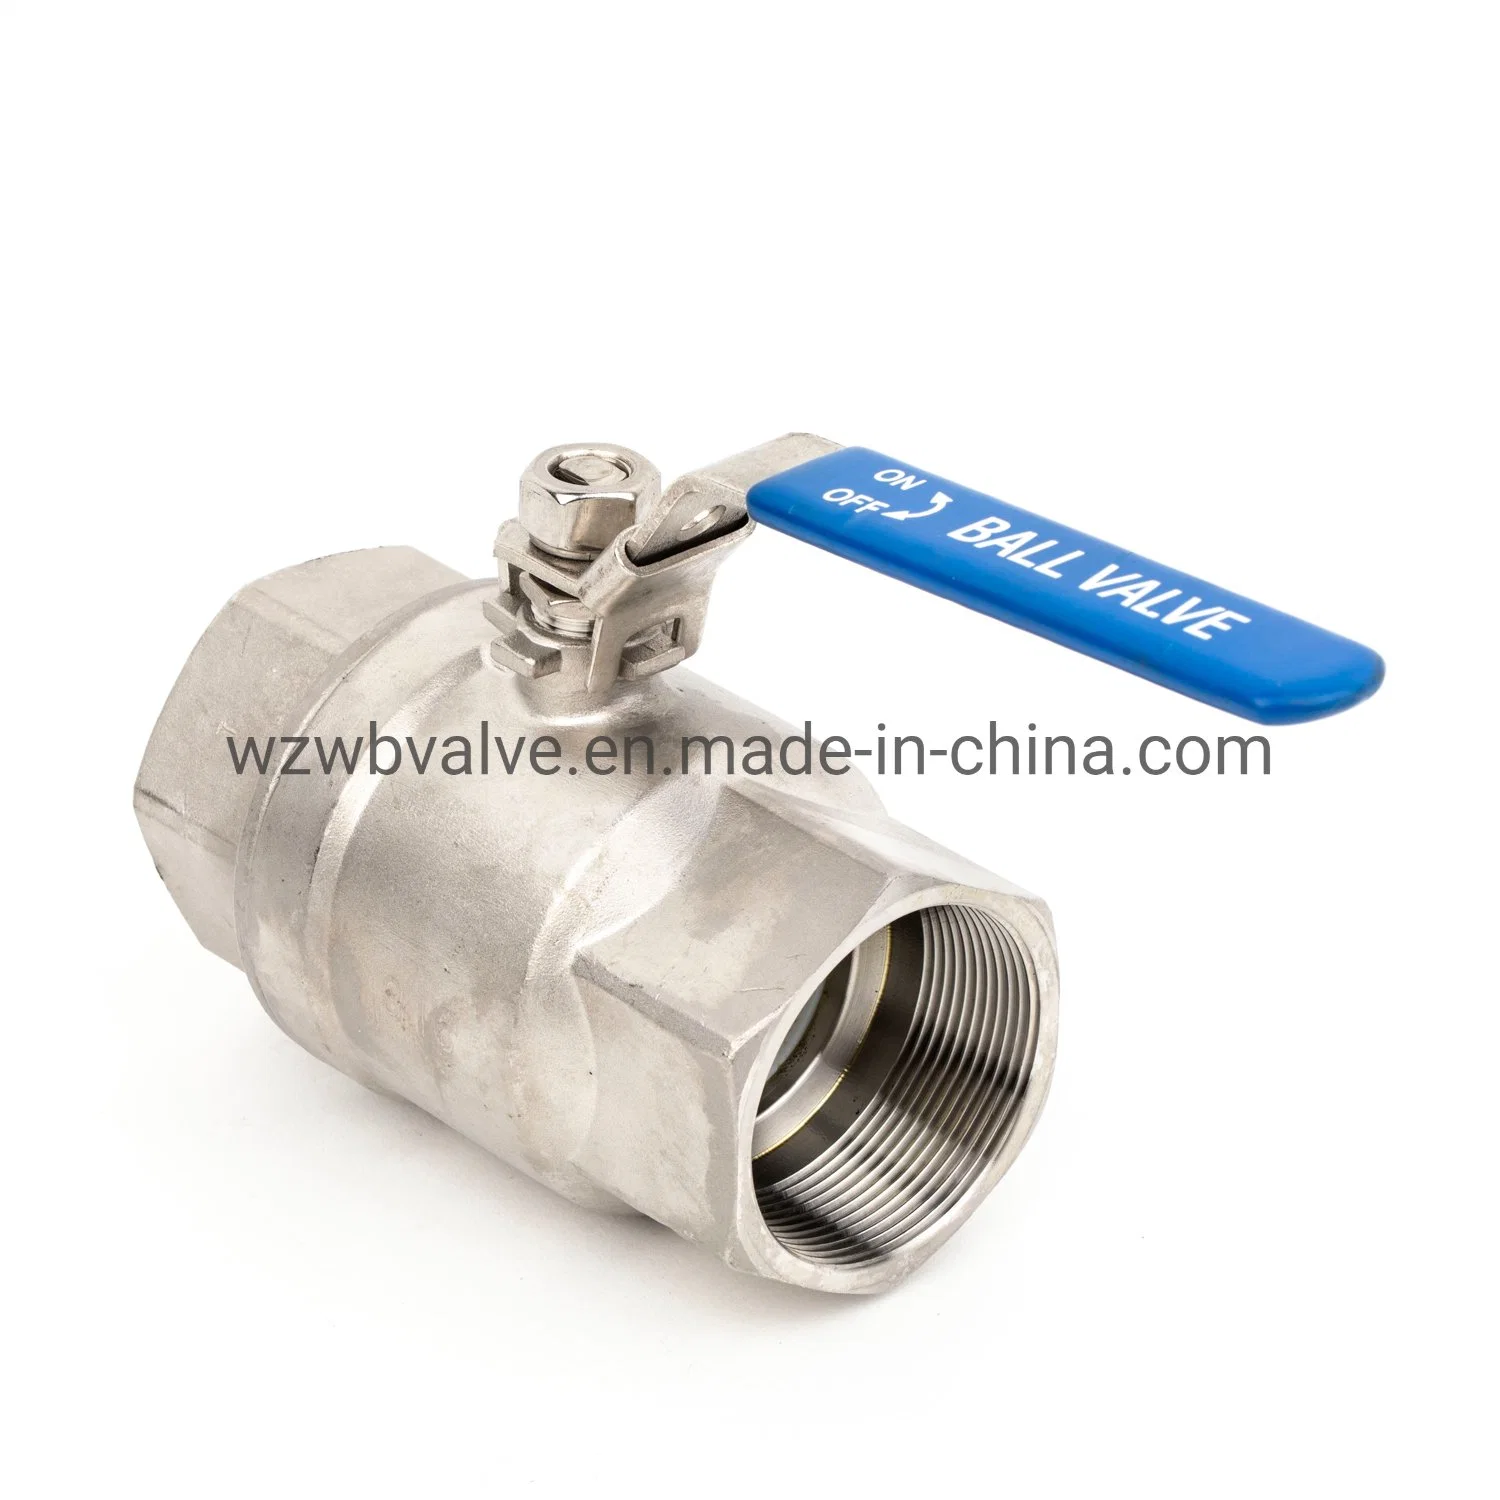 DIN3202-M3 Economical Light Type Female Thread Pn63 Bsp Threaded/Flanged Ss Stainless Steel 1PC 2PC 3PC Ball Valve Pn63 with ISO Locking Device